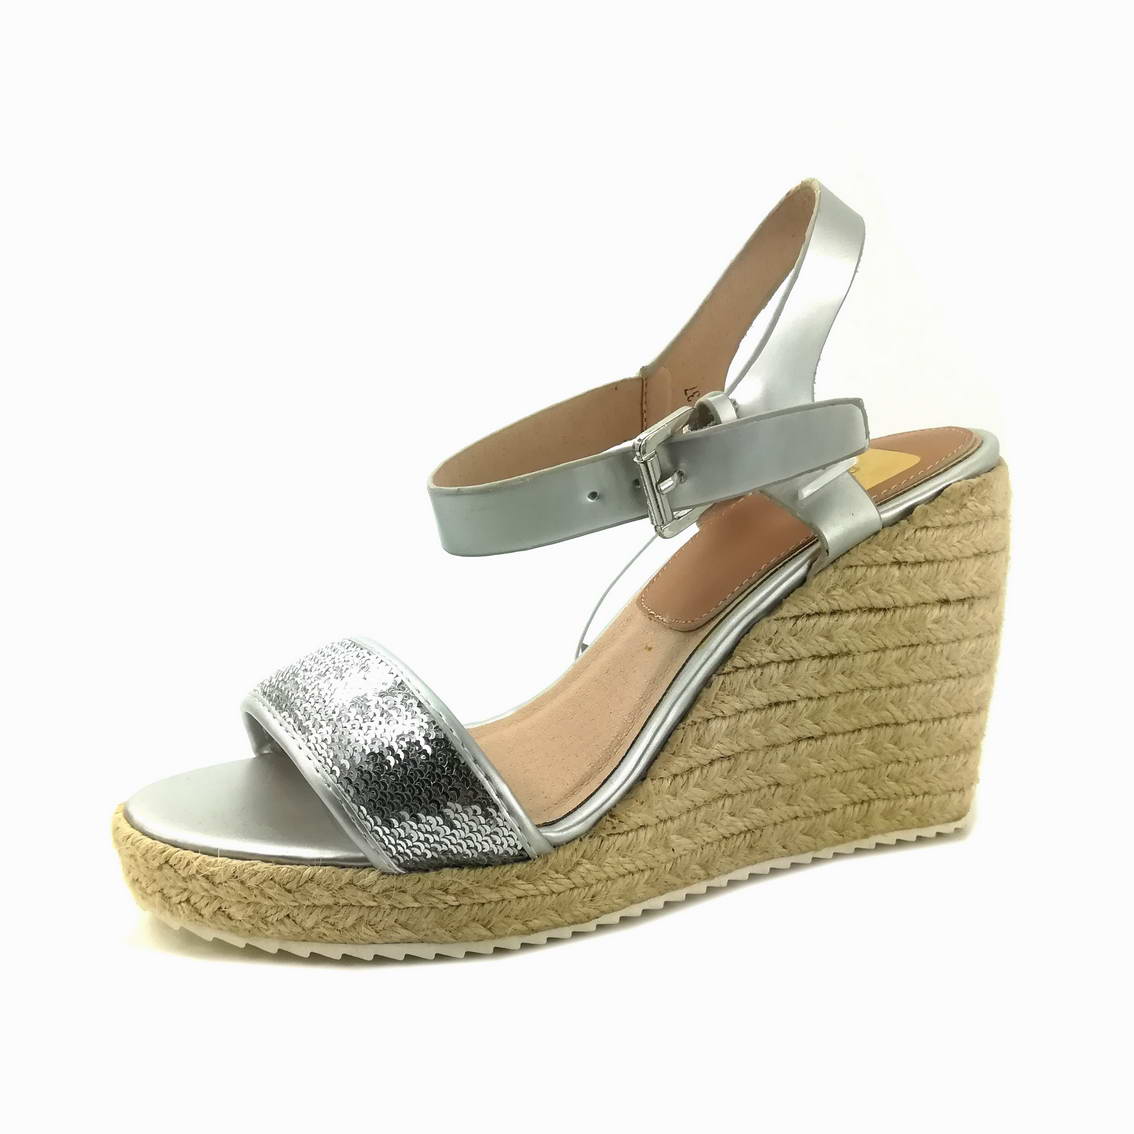 MSXDES19 QUALITY WEDGE ESPADRILLES SILVER - Sunshineo shoe factory